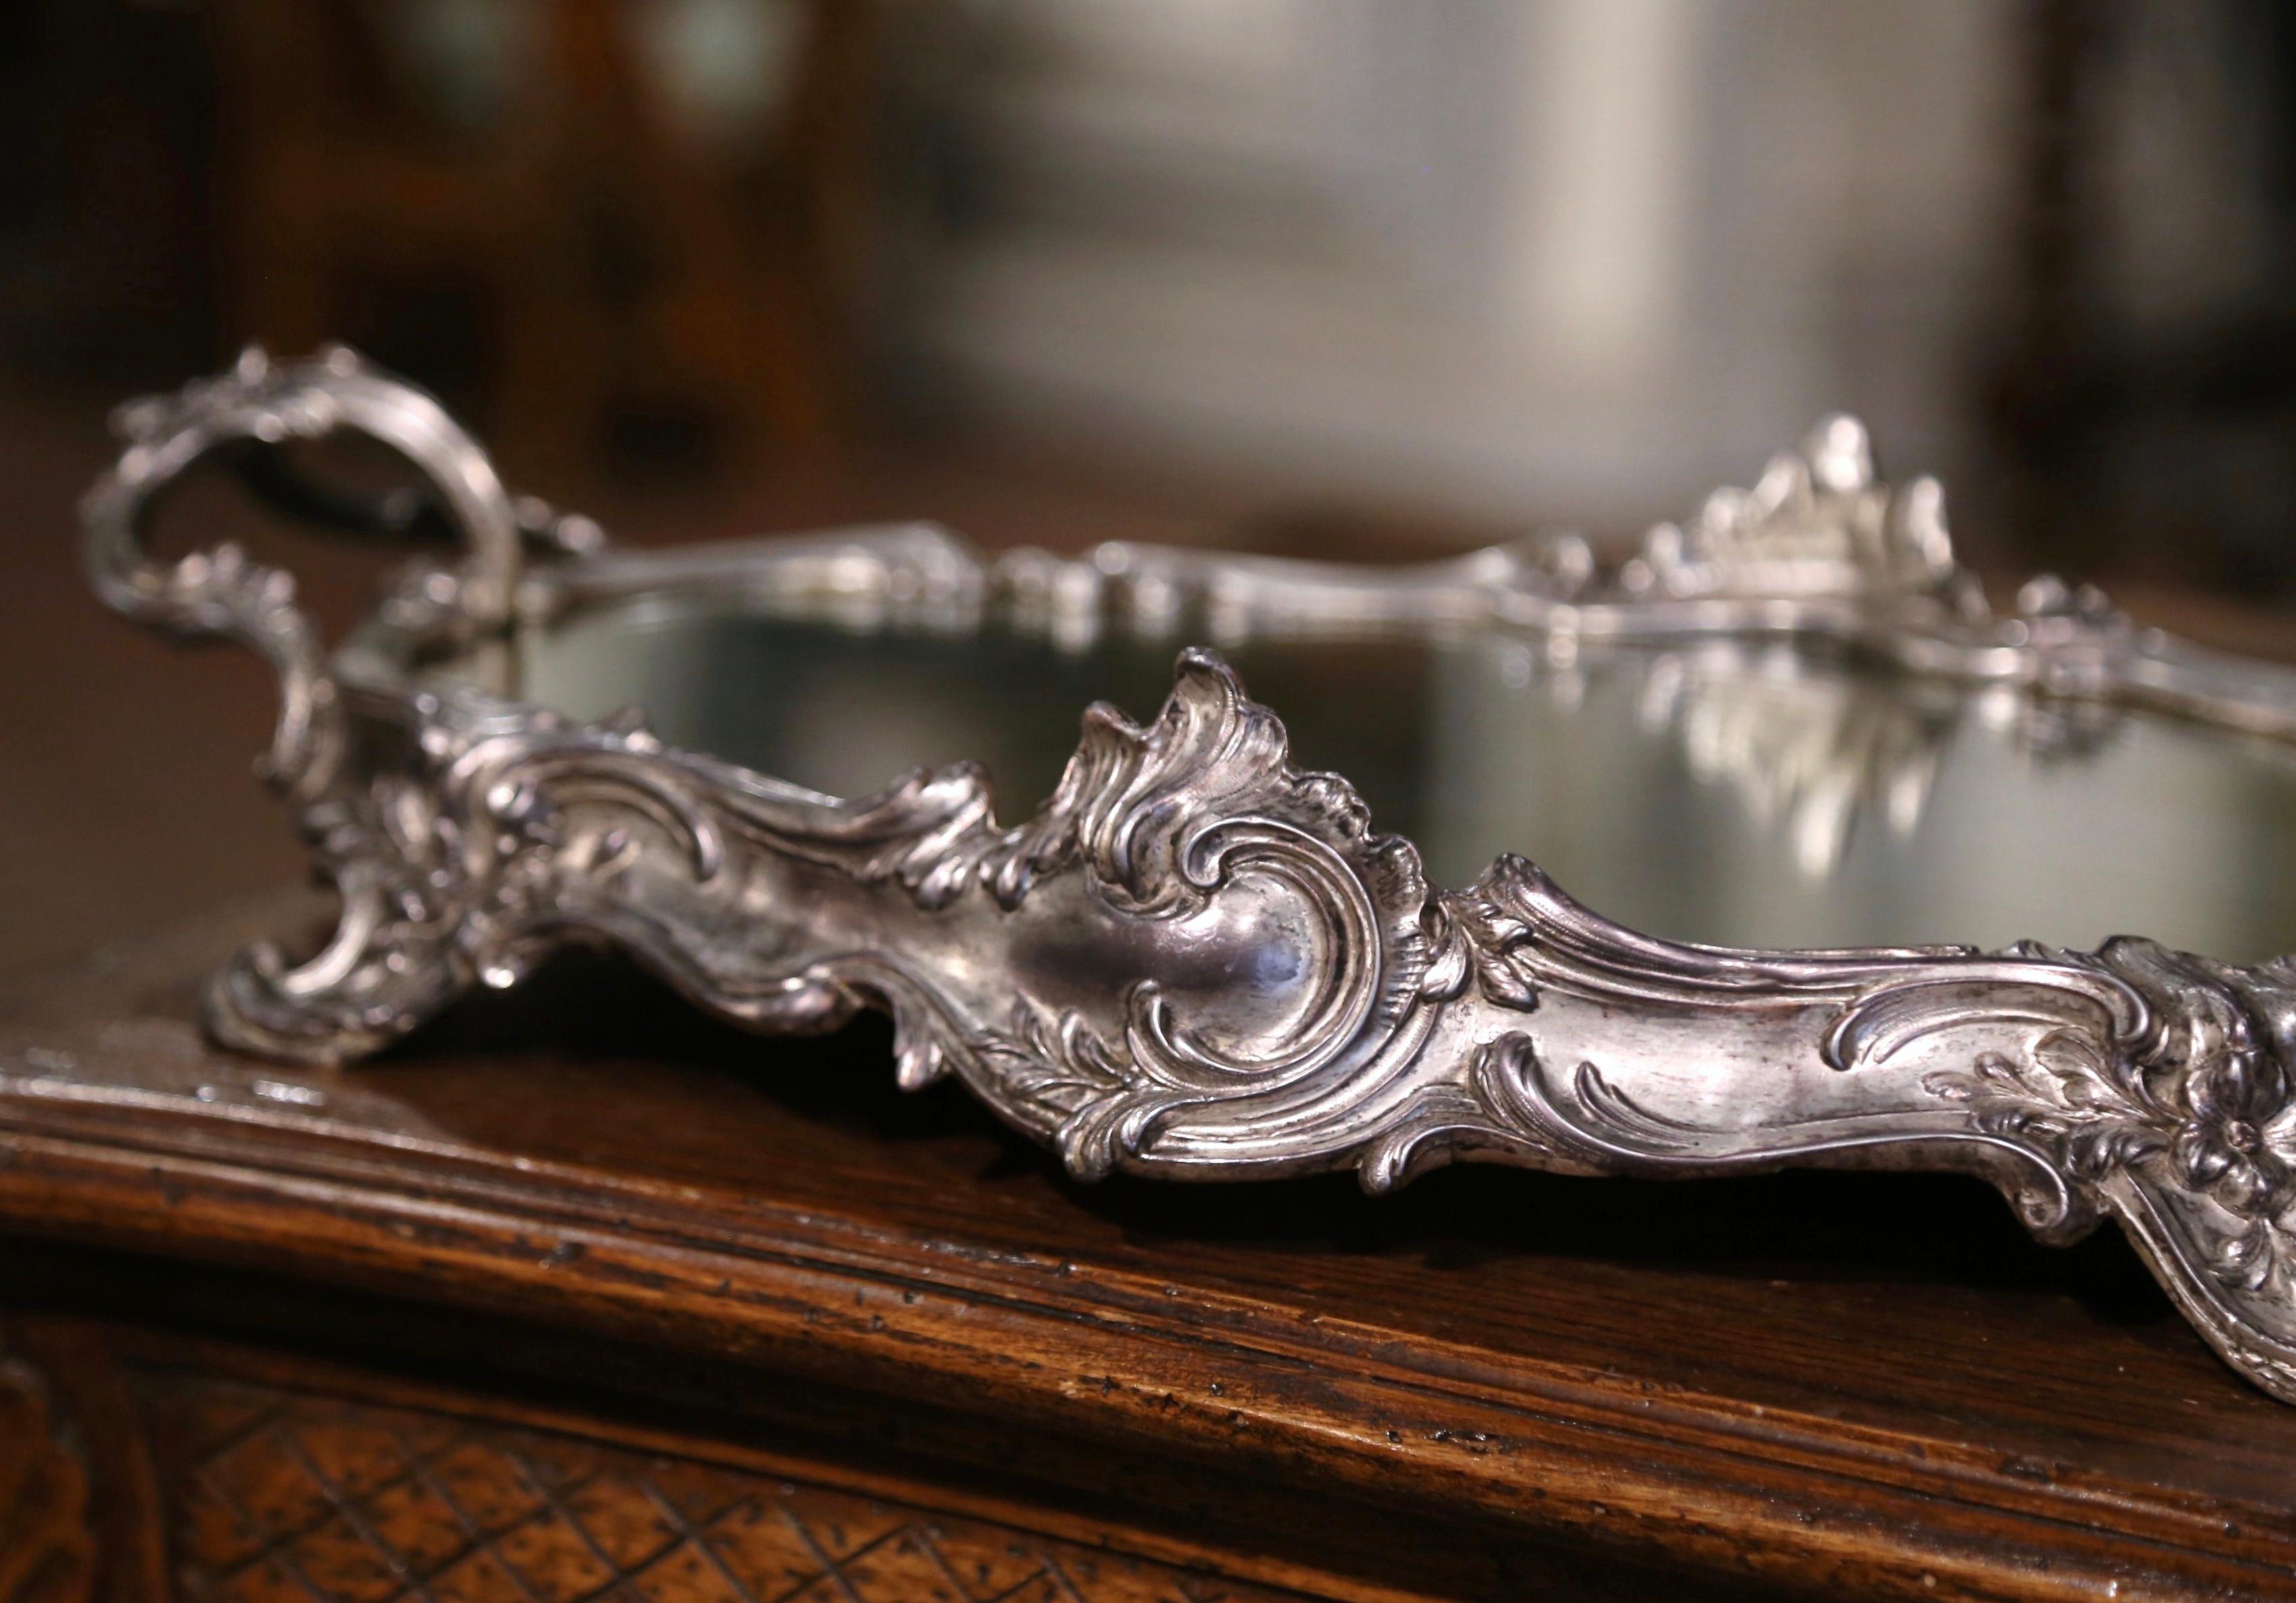 Hand-Crafted 19th Century French Louis XV Silver Mirrored Surtout de Table Centerpiece